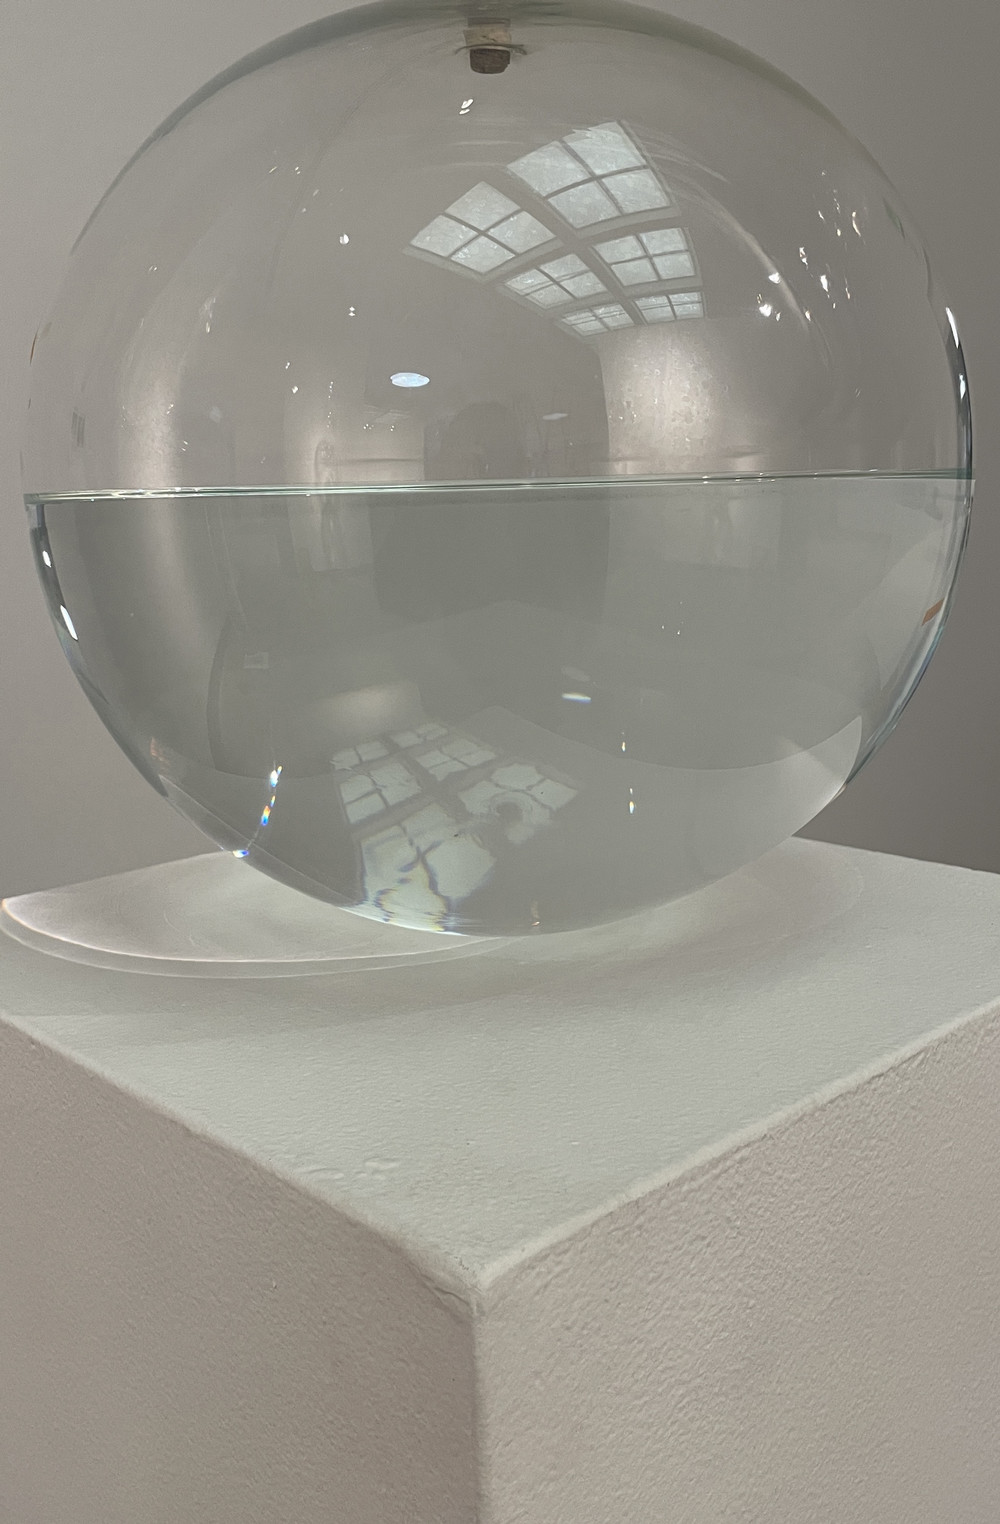  Katherine grey glass sphere with water half full